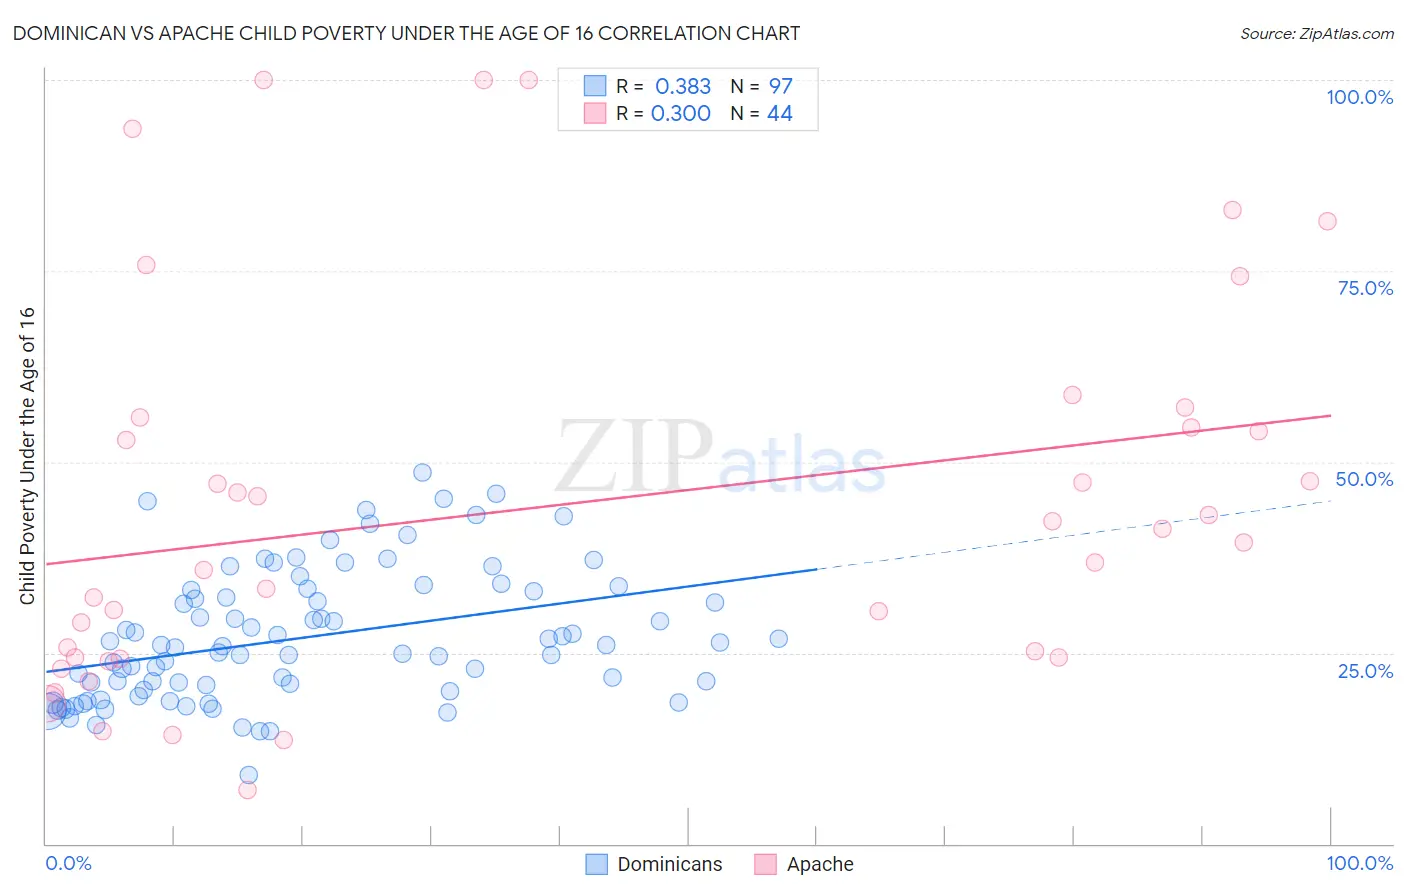 Dominican vs Apache Child Poverty Under the Age of 16